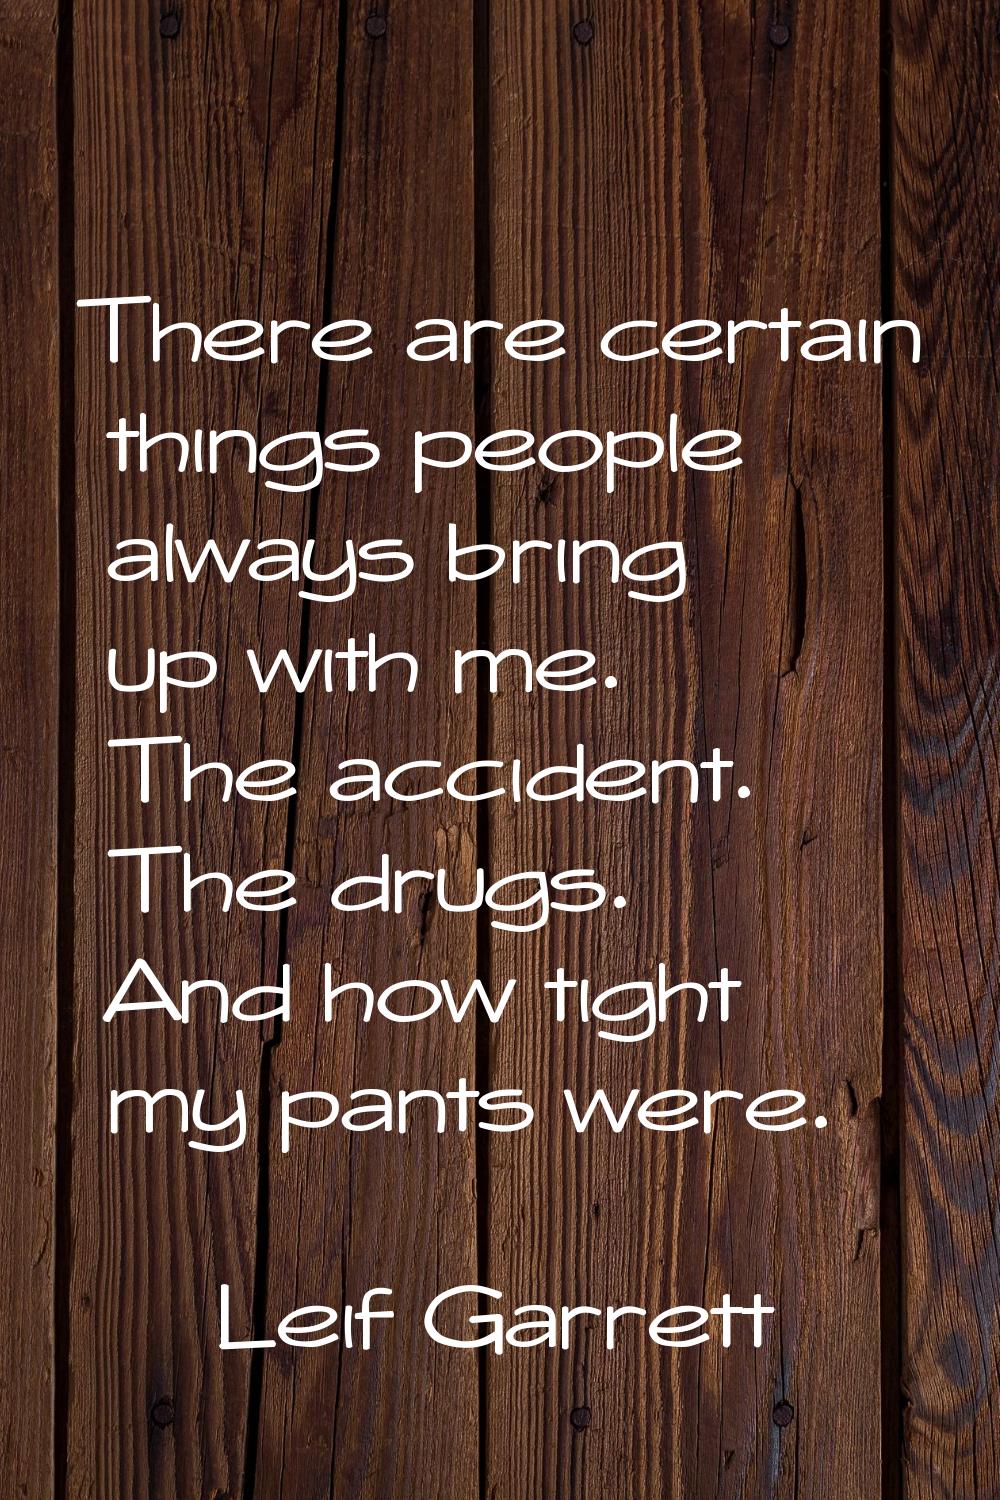 There are certain things people always bring up with me. The accident. The drugs. And how tight my 